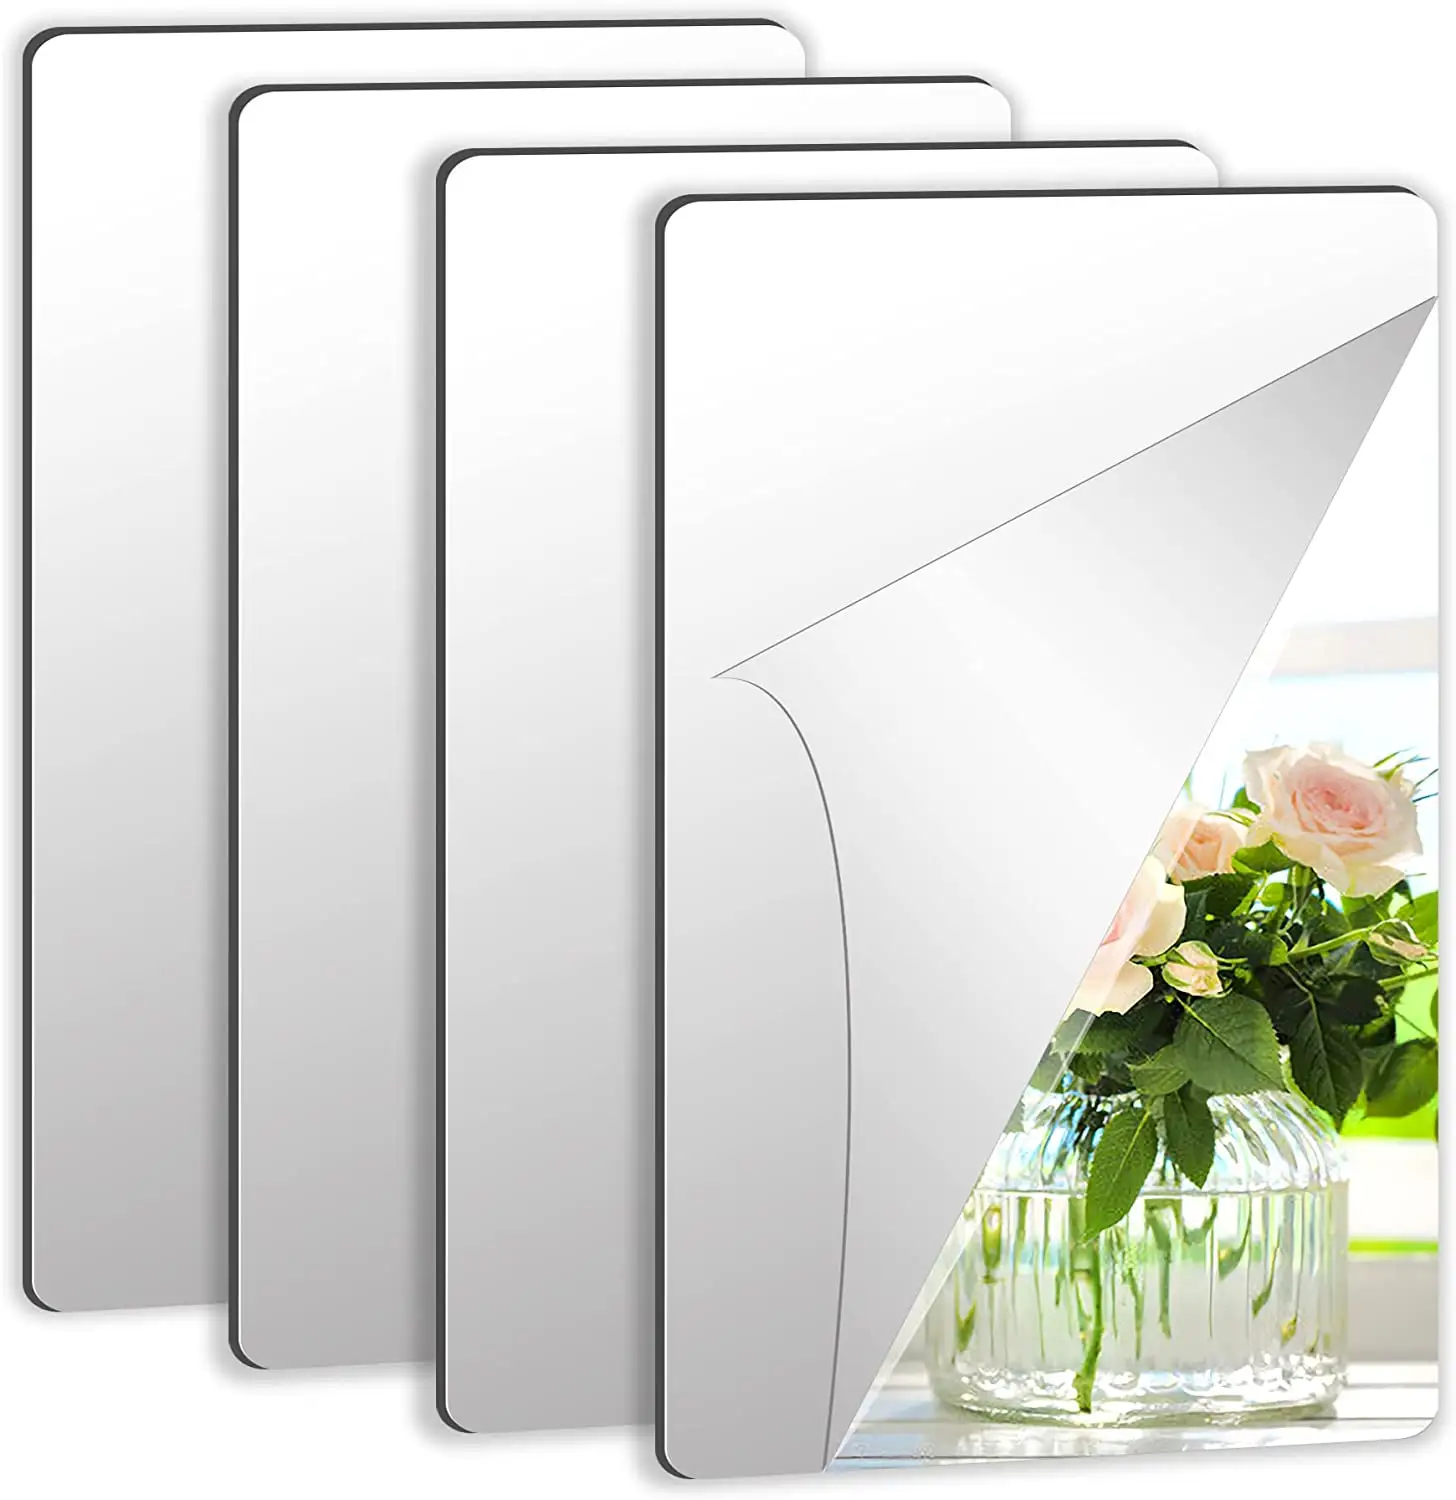 Self Adhesive Acrylic Mirror Mirror Tiles Flexible Plastic Sheets Wall Stickers 2MM Thick Frameless Small Mirror